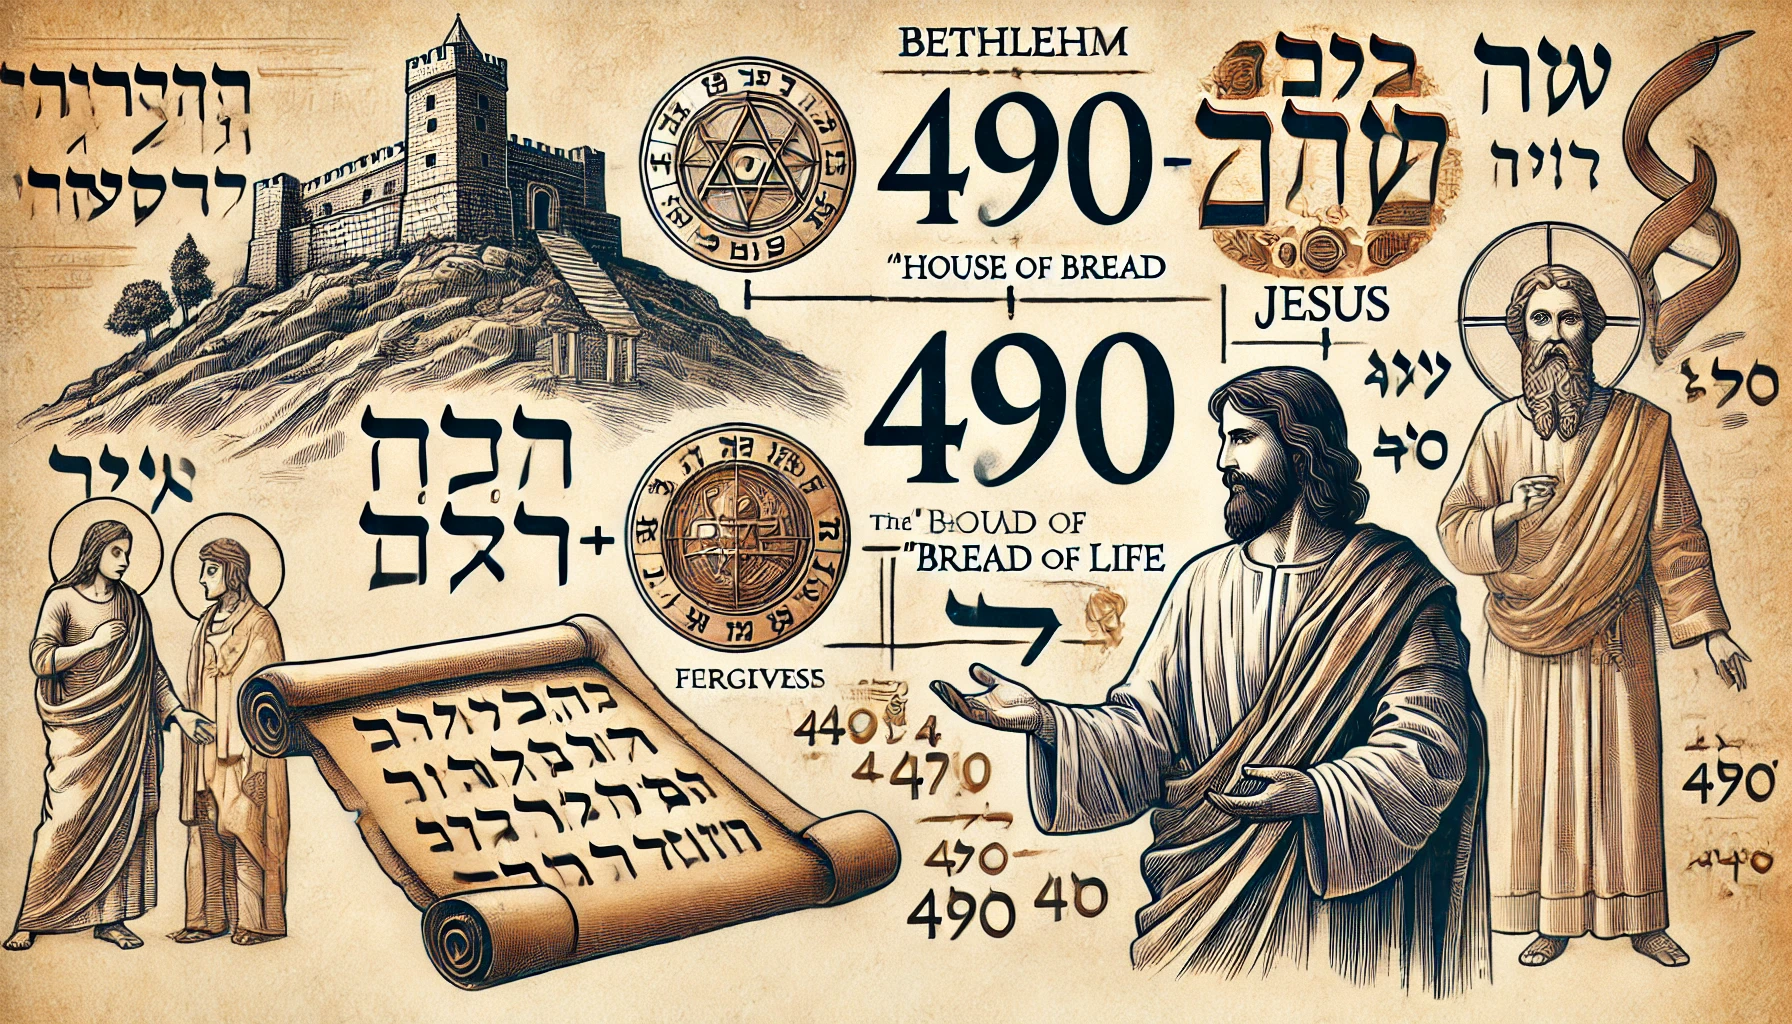 An illustration depicting the concept of the number 490 in the Bible. Show a connection between Bethlehem, represented by the 'House of Bread', and Jesus as the 'Bread of Life'. Include elements such as ancient Hebrew letters with their numerical values, a symbolic representation of forgiveness, and an image of Jesus teaching. The background could feature an ancient scroll with the Hebrew alphabet and a scene of Bethlehem. Highlight the numerical values of the letters that add up to 490.